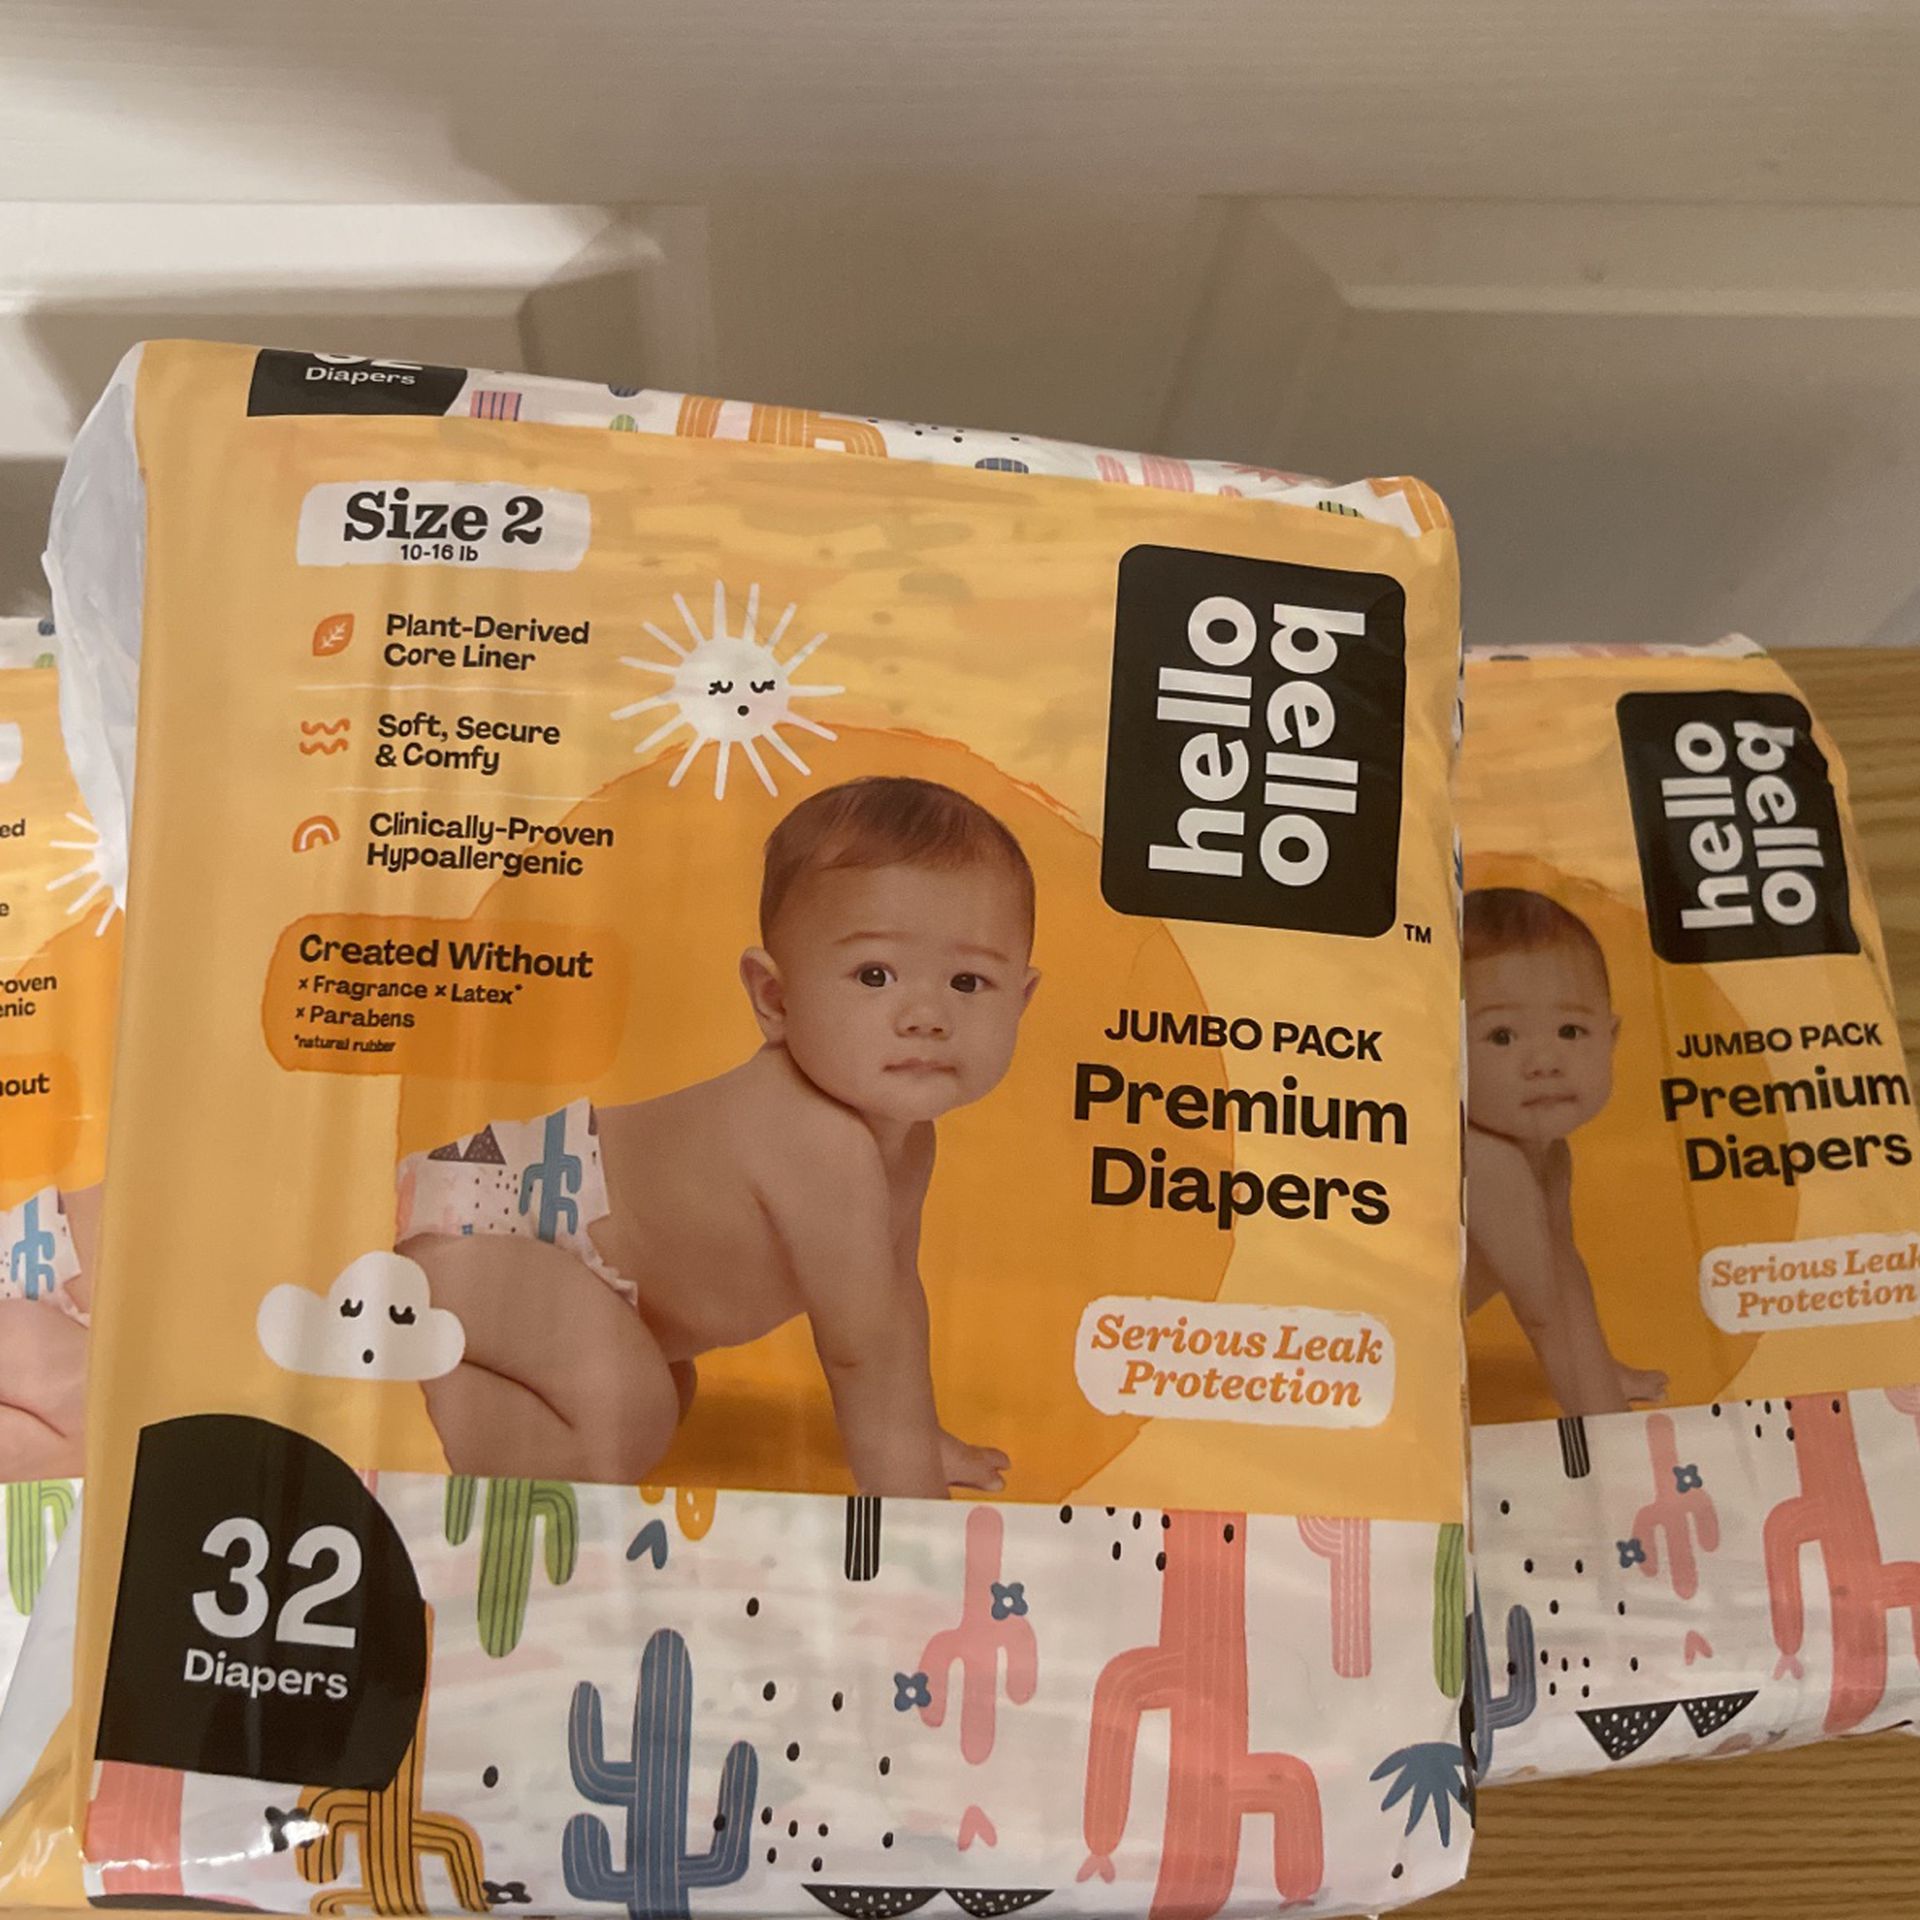 x3 32 Pack Of HelloBello Diapers Size 2 